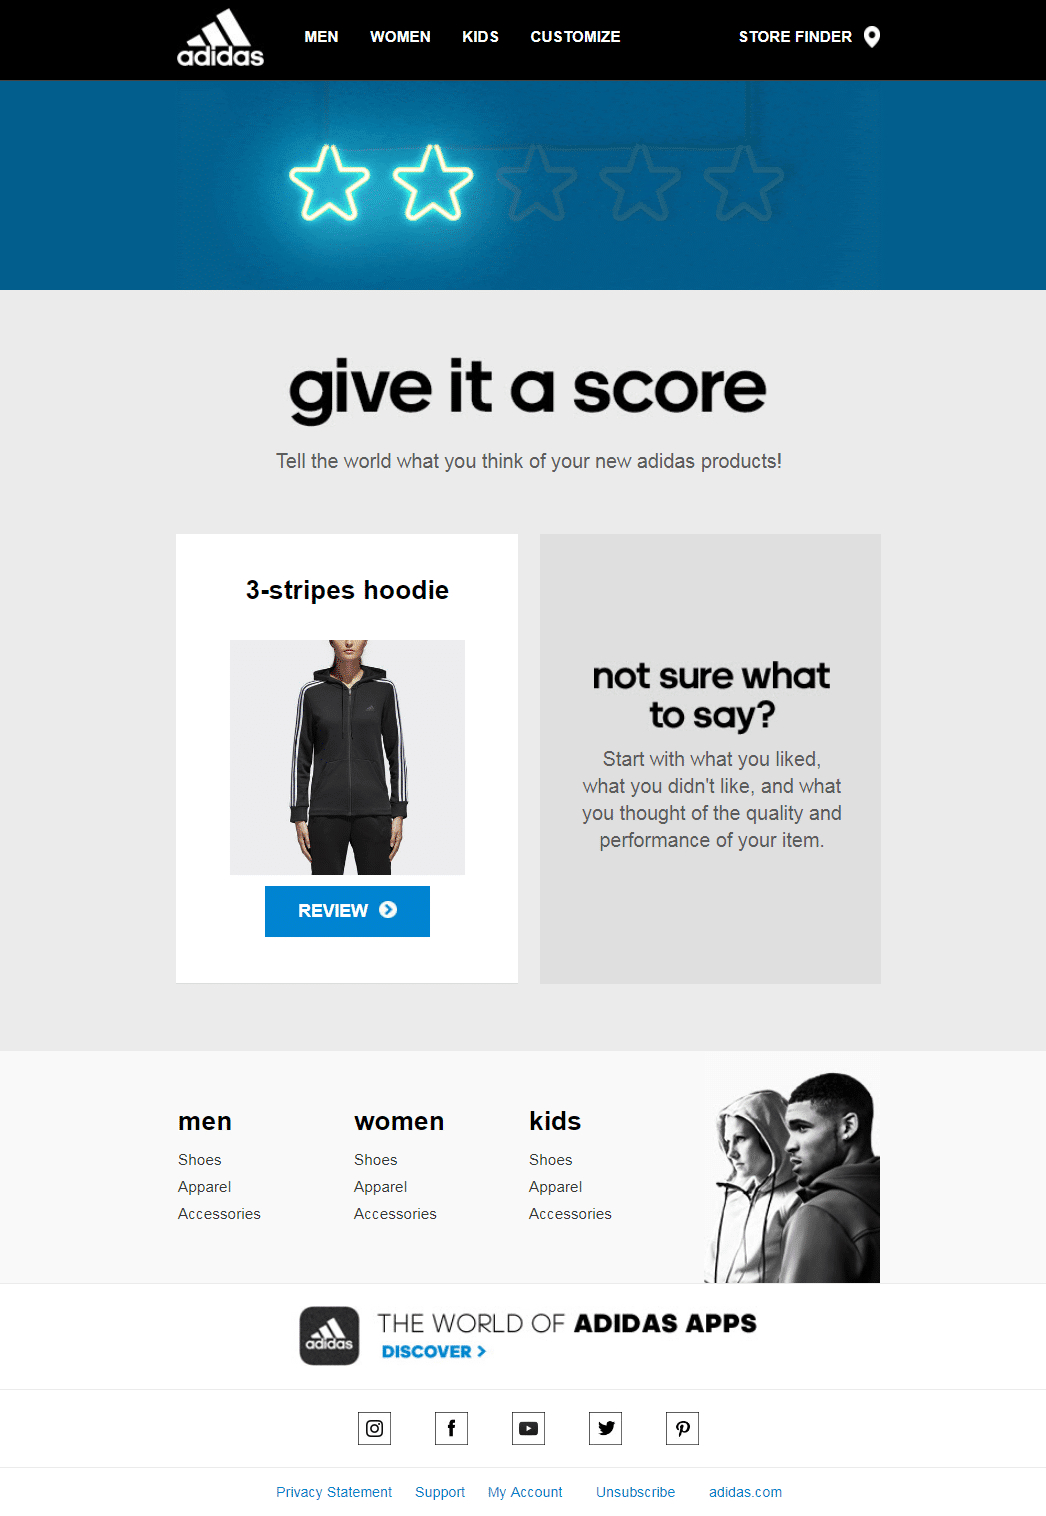 Adidas email personalized campaign to encourage customer reviews.